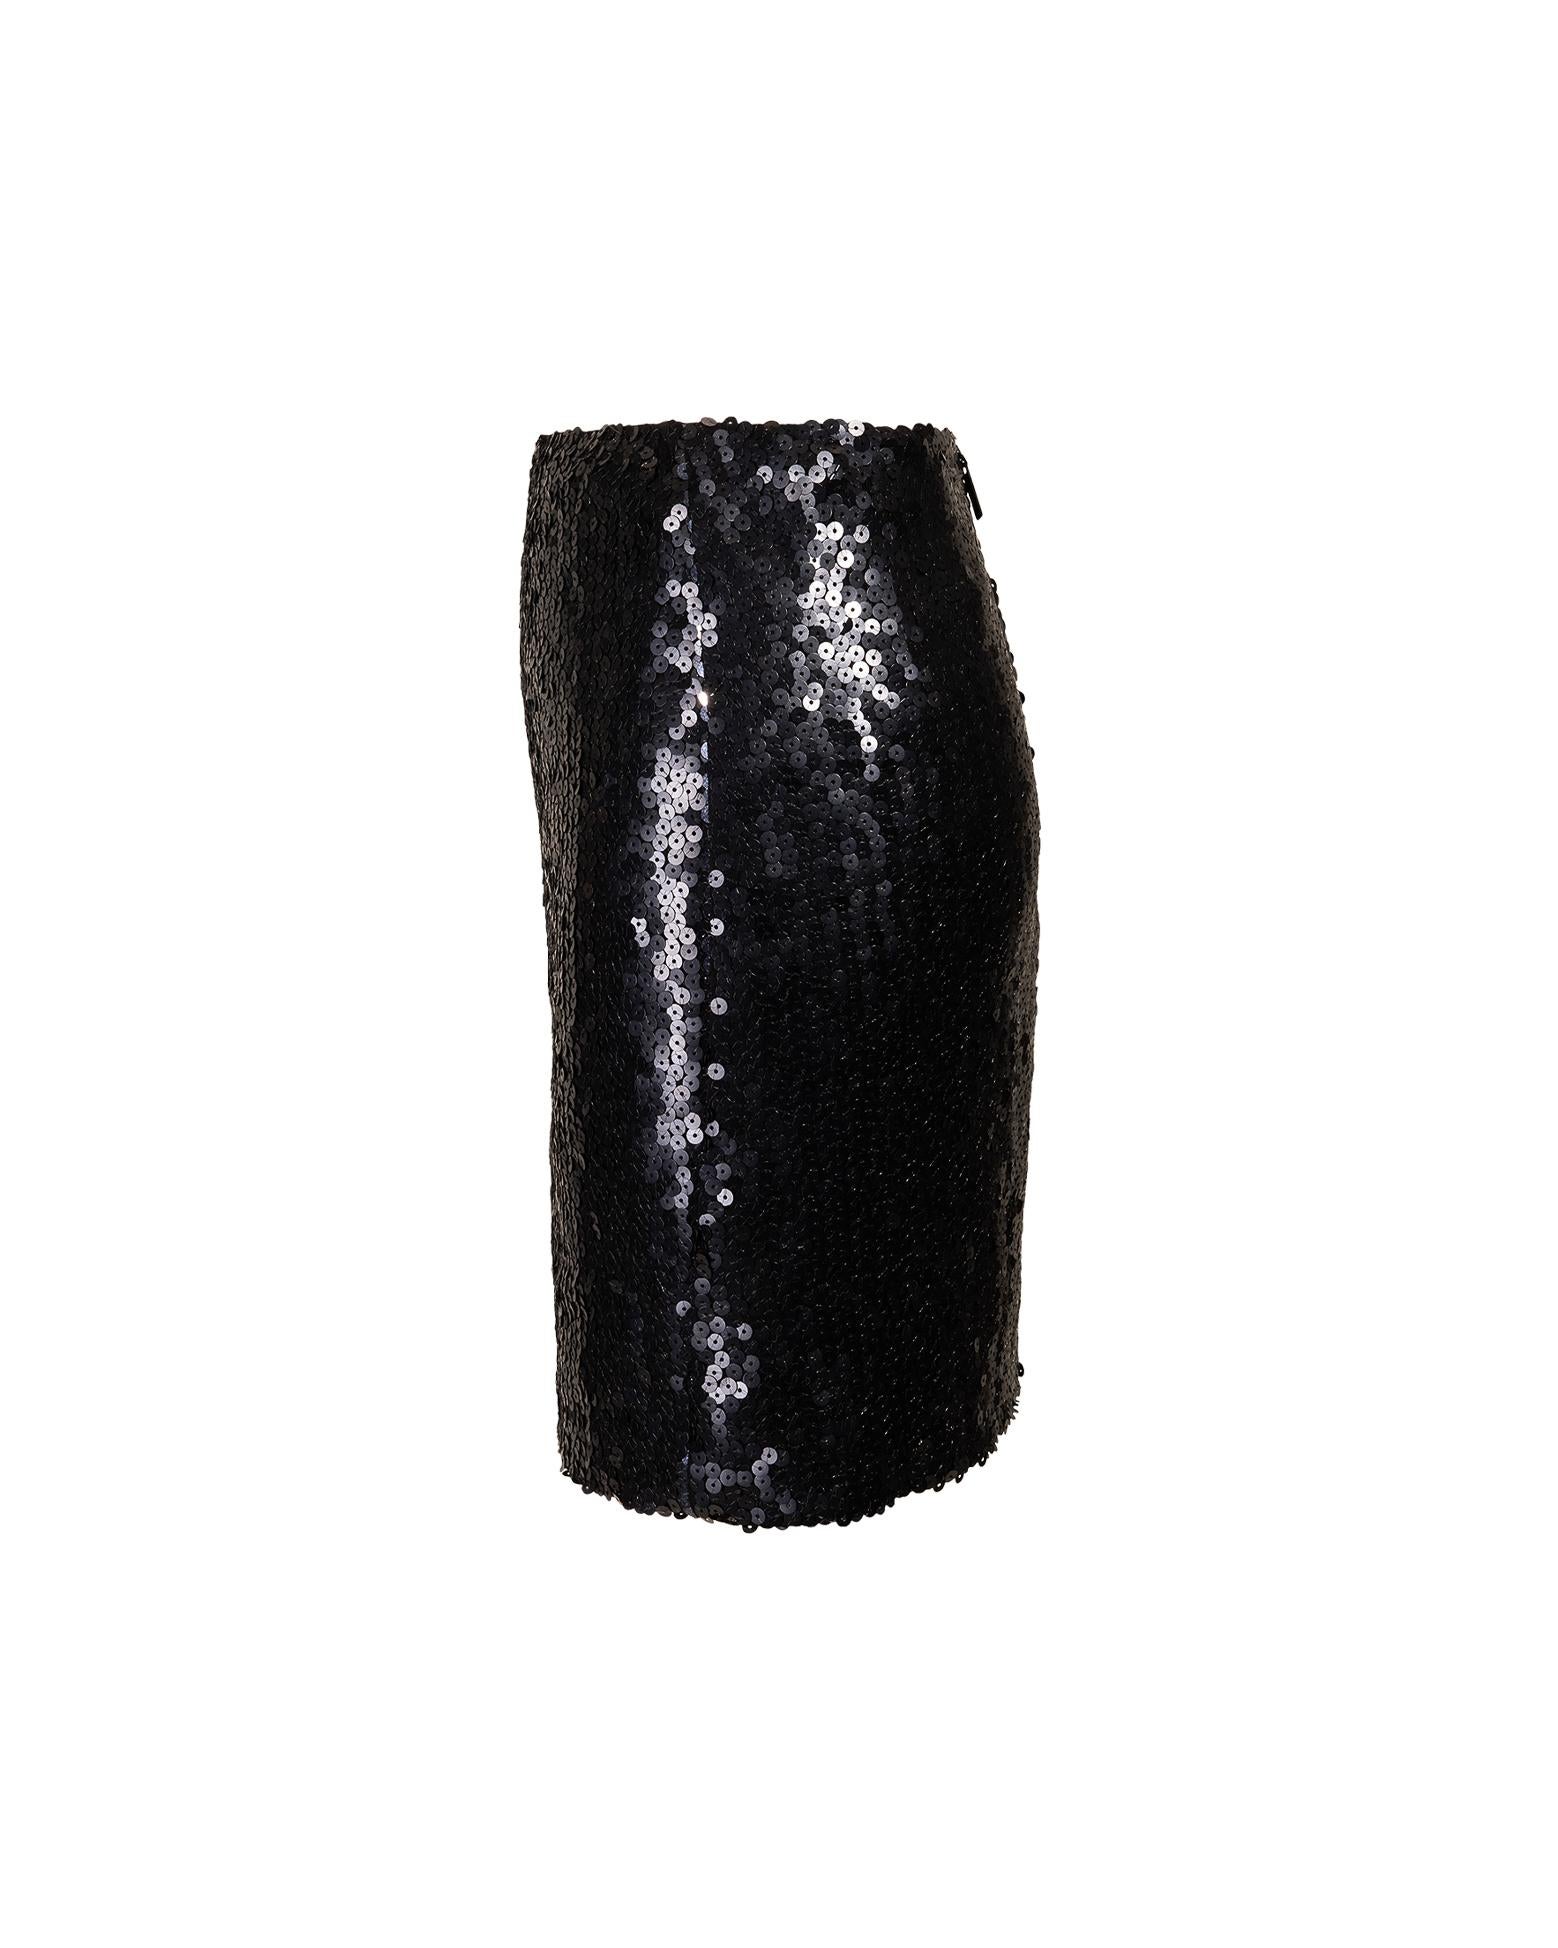 S/S 2007 Chanel black sequin mini skirt with silk lining. Fully sequined black skirt. Stamped back zip closure. Shorts version seen on runway and in the ad campaign.